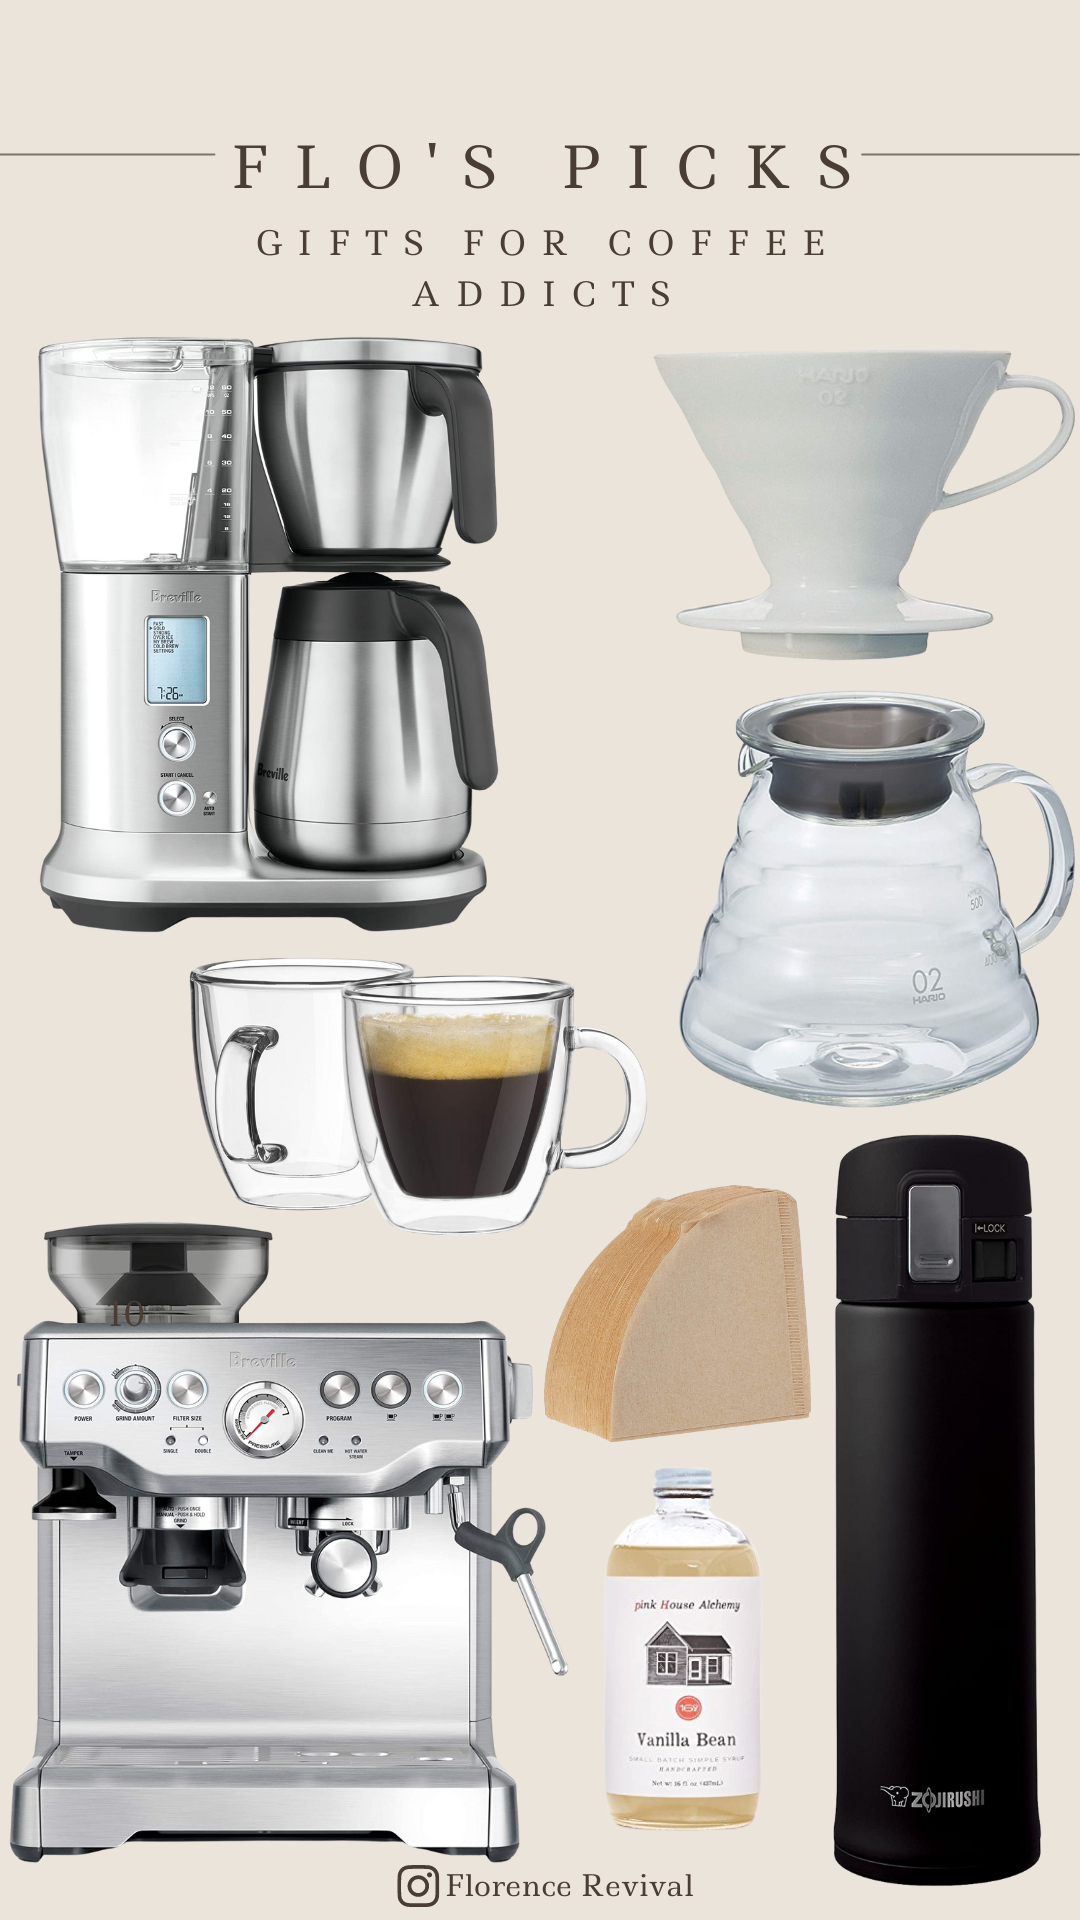 All of Katie and Jared's favorite coffee items they use and recommend as gifts for coffee lovers.